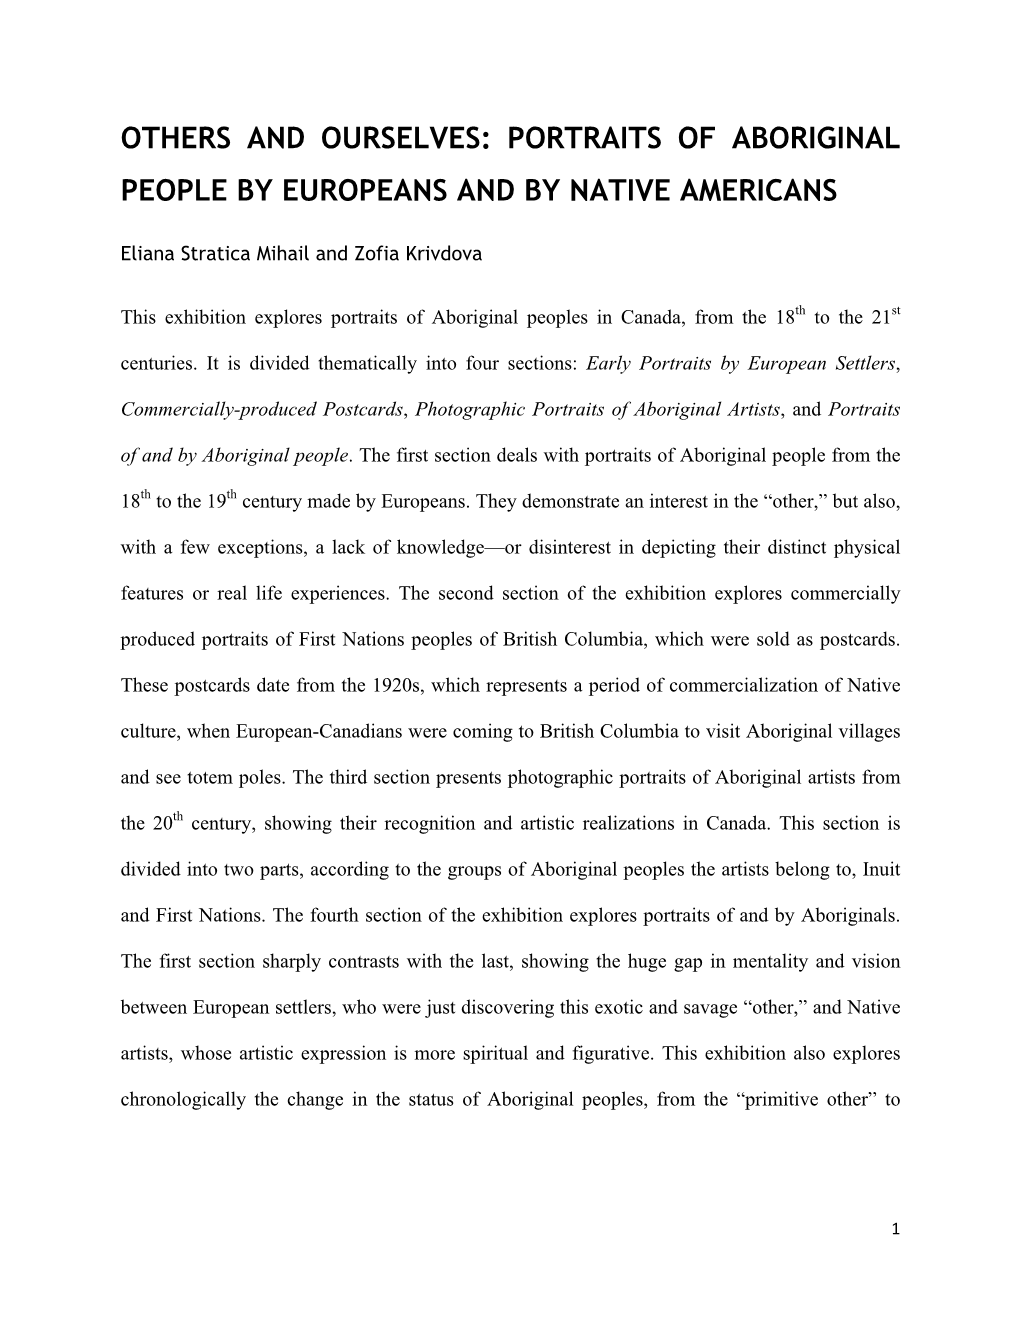 Portraits of Aboriginal People by Europeans and by Native Americans